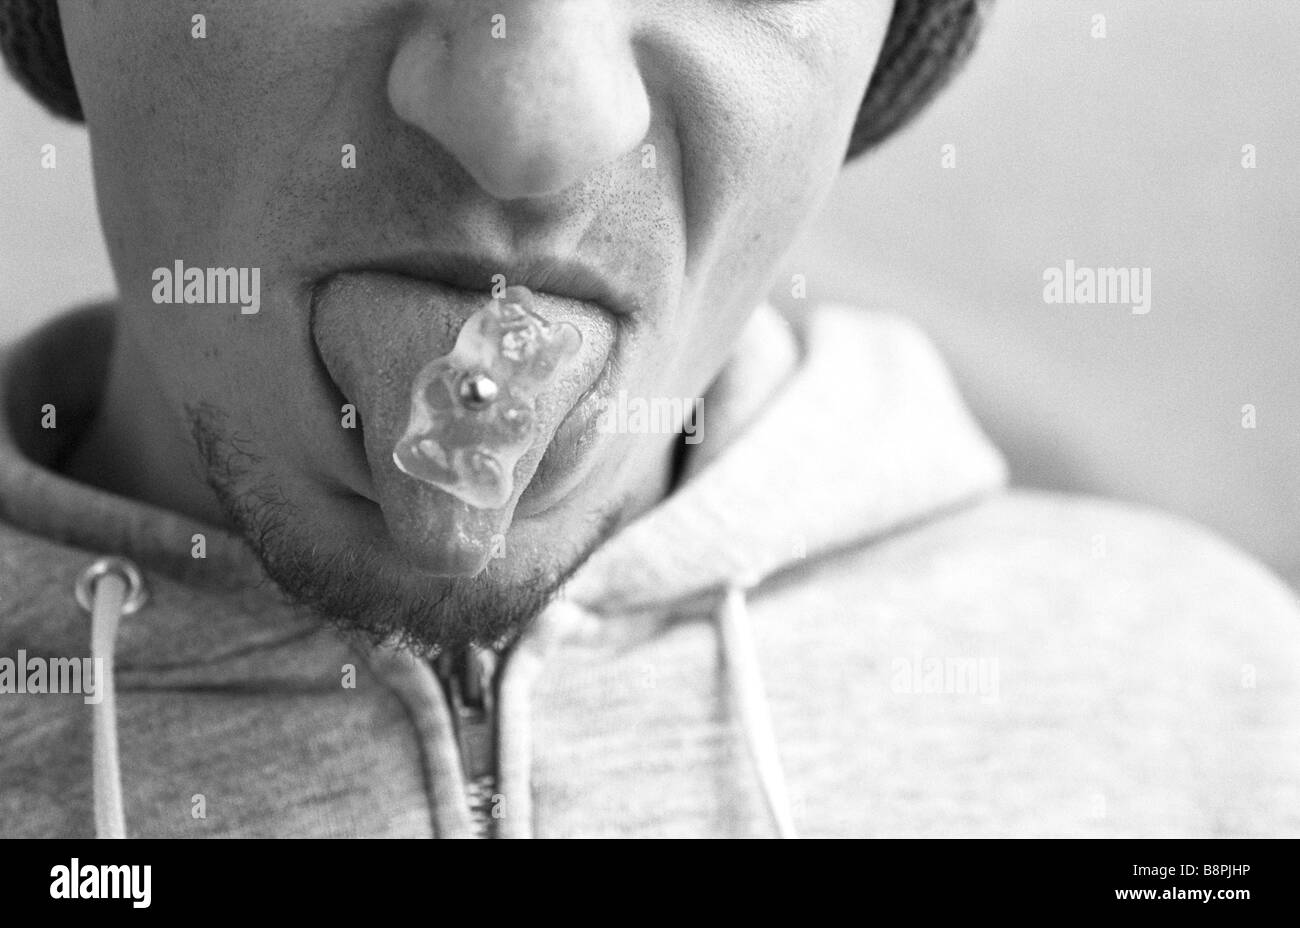 Man sticking out pierced tongue, candy bear stuck to piercing Stock Photo